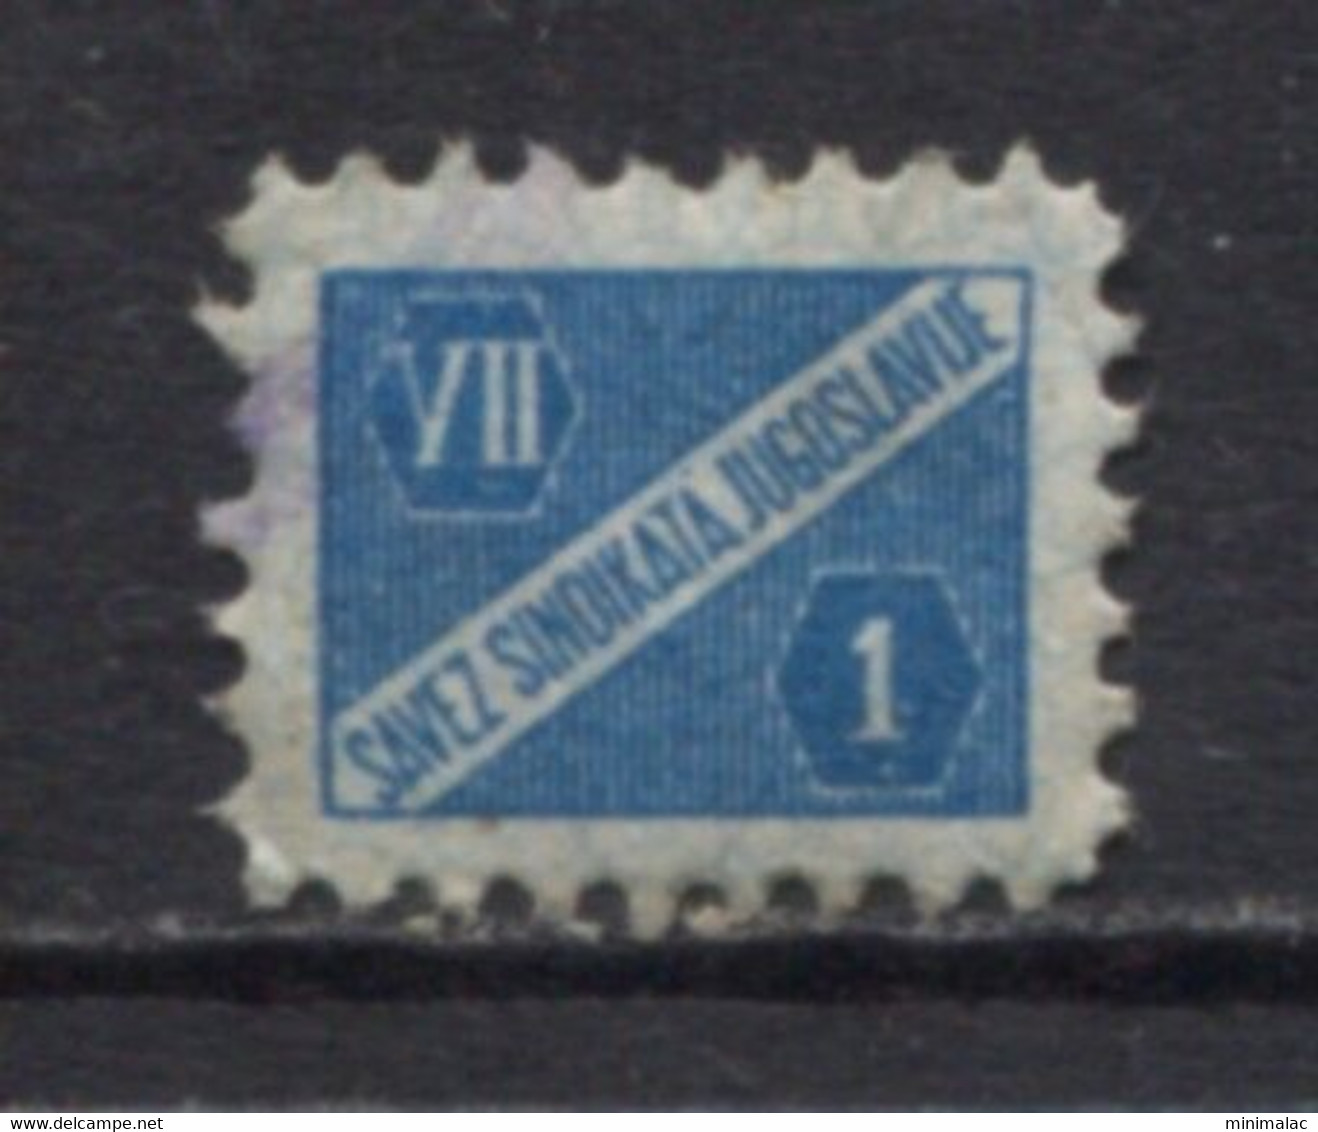 Yugoslavia 50's, Stamp For Membership, Labor Union, Administrative Stamp - Revenue, Tax Stamp, VII/1 - Officials